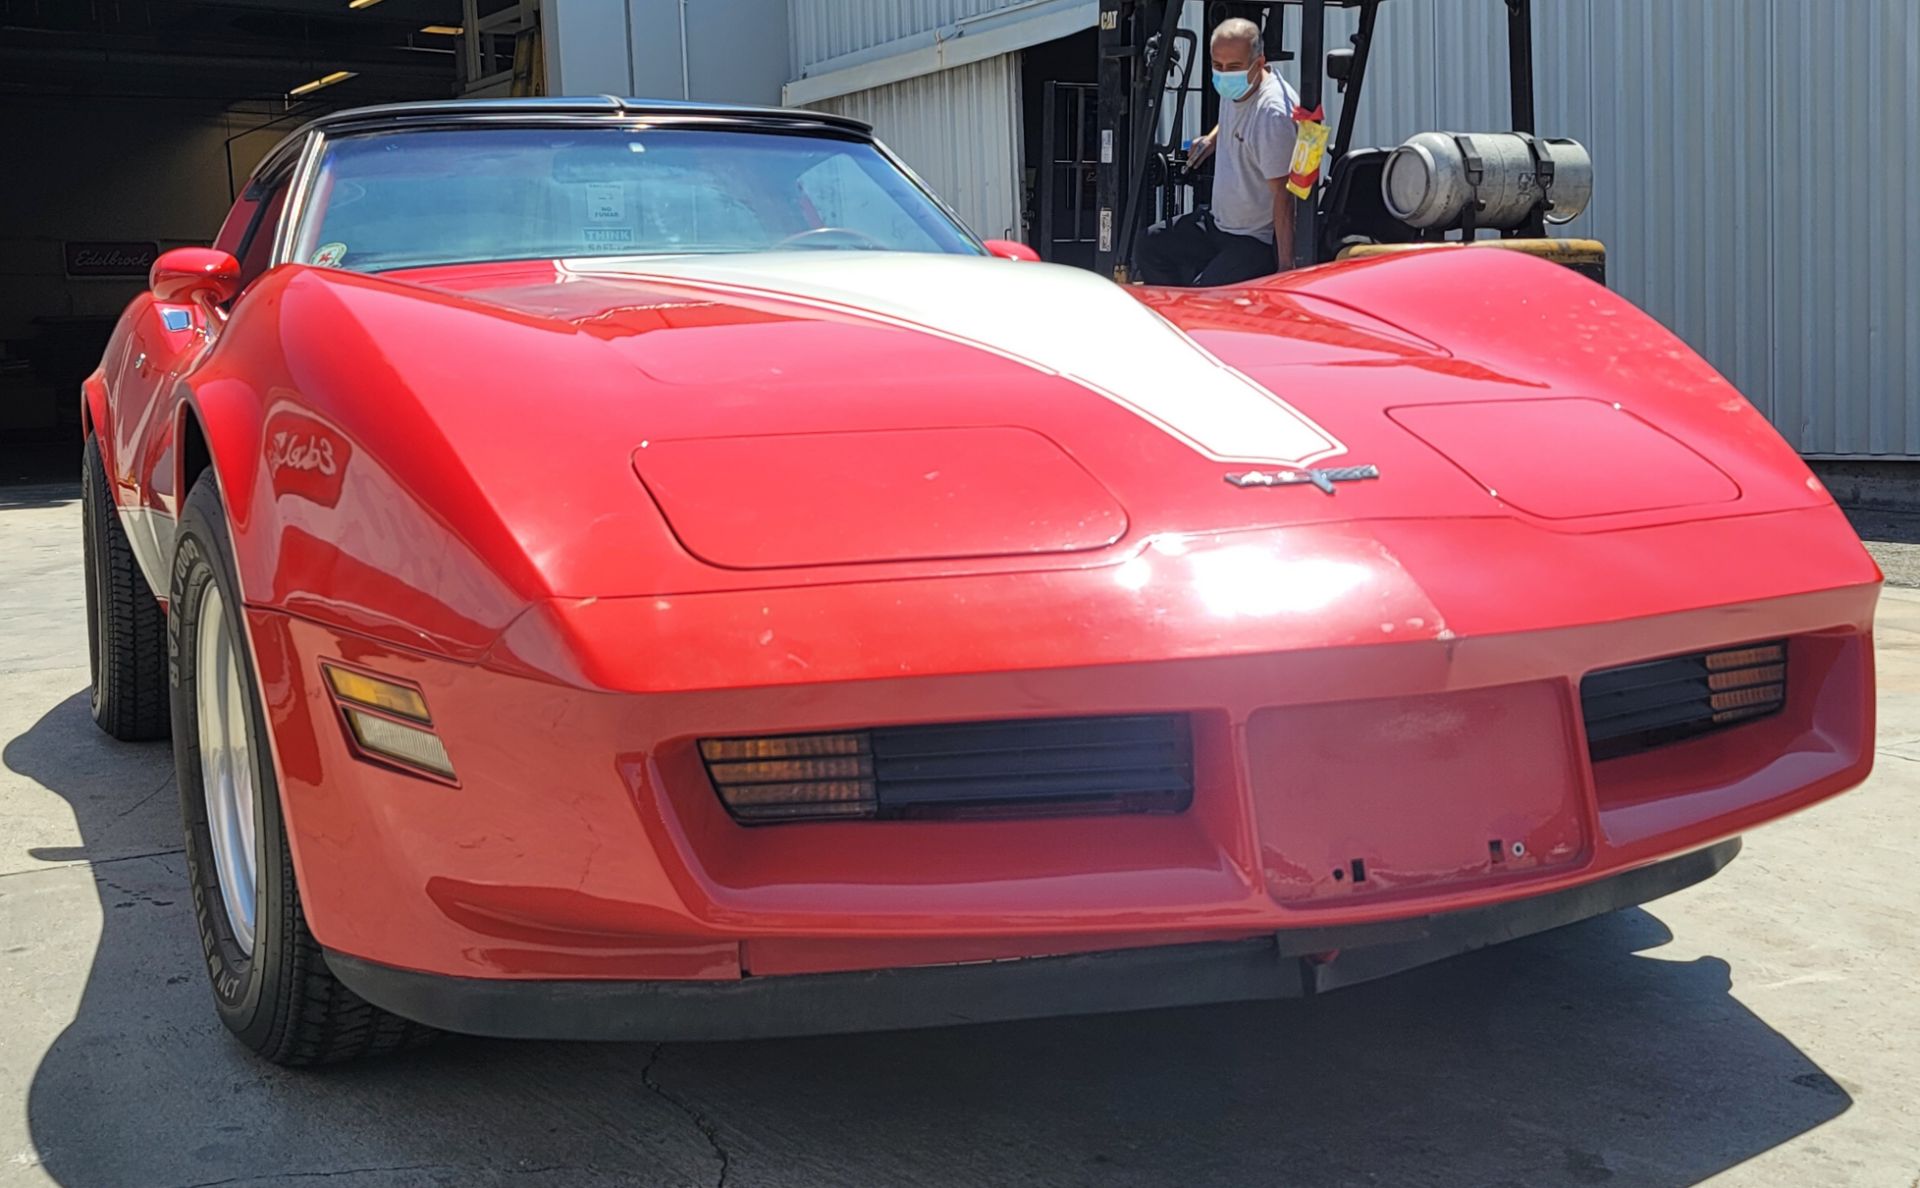 1980 CHEVROLET CORVETTE, WAS VIC EDELBROCK'S PERSONAL CAR BOUGHT FOR R&D, RED INTERIOR, TITLE ONLY. - Image 8 of 70